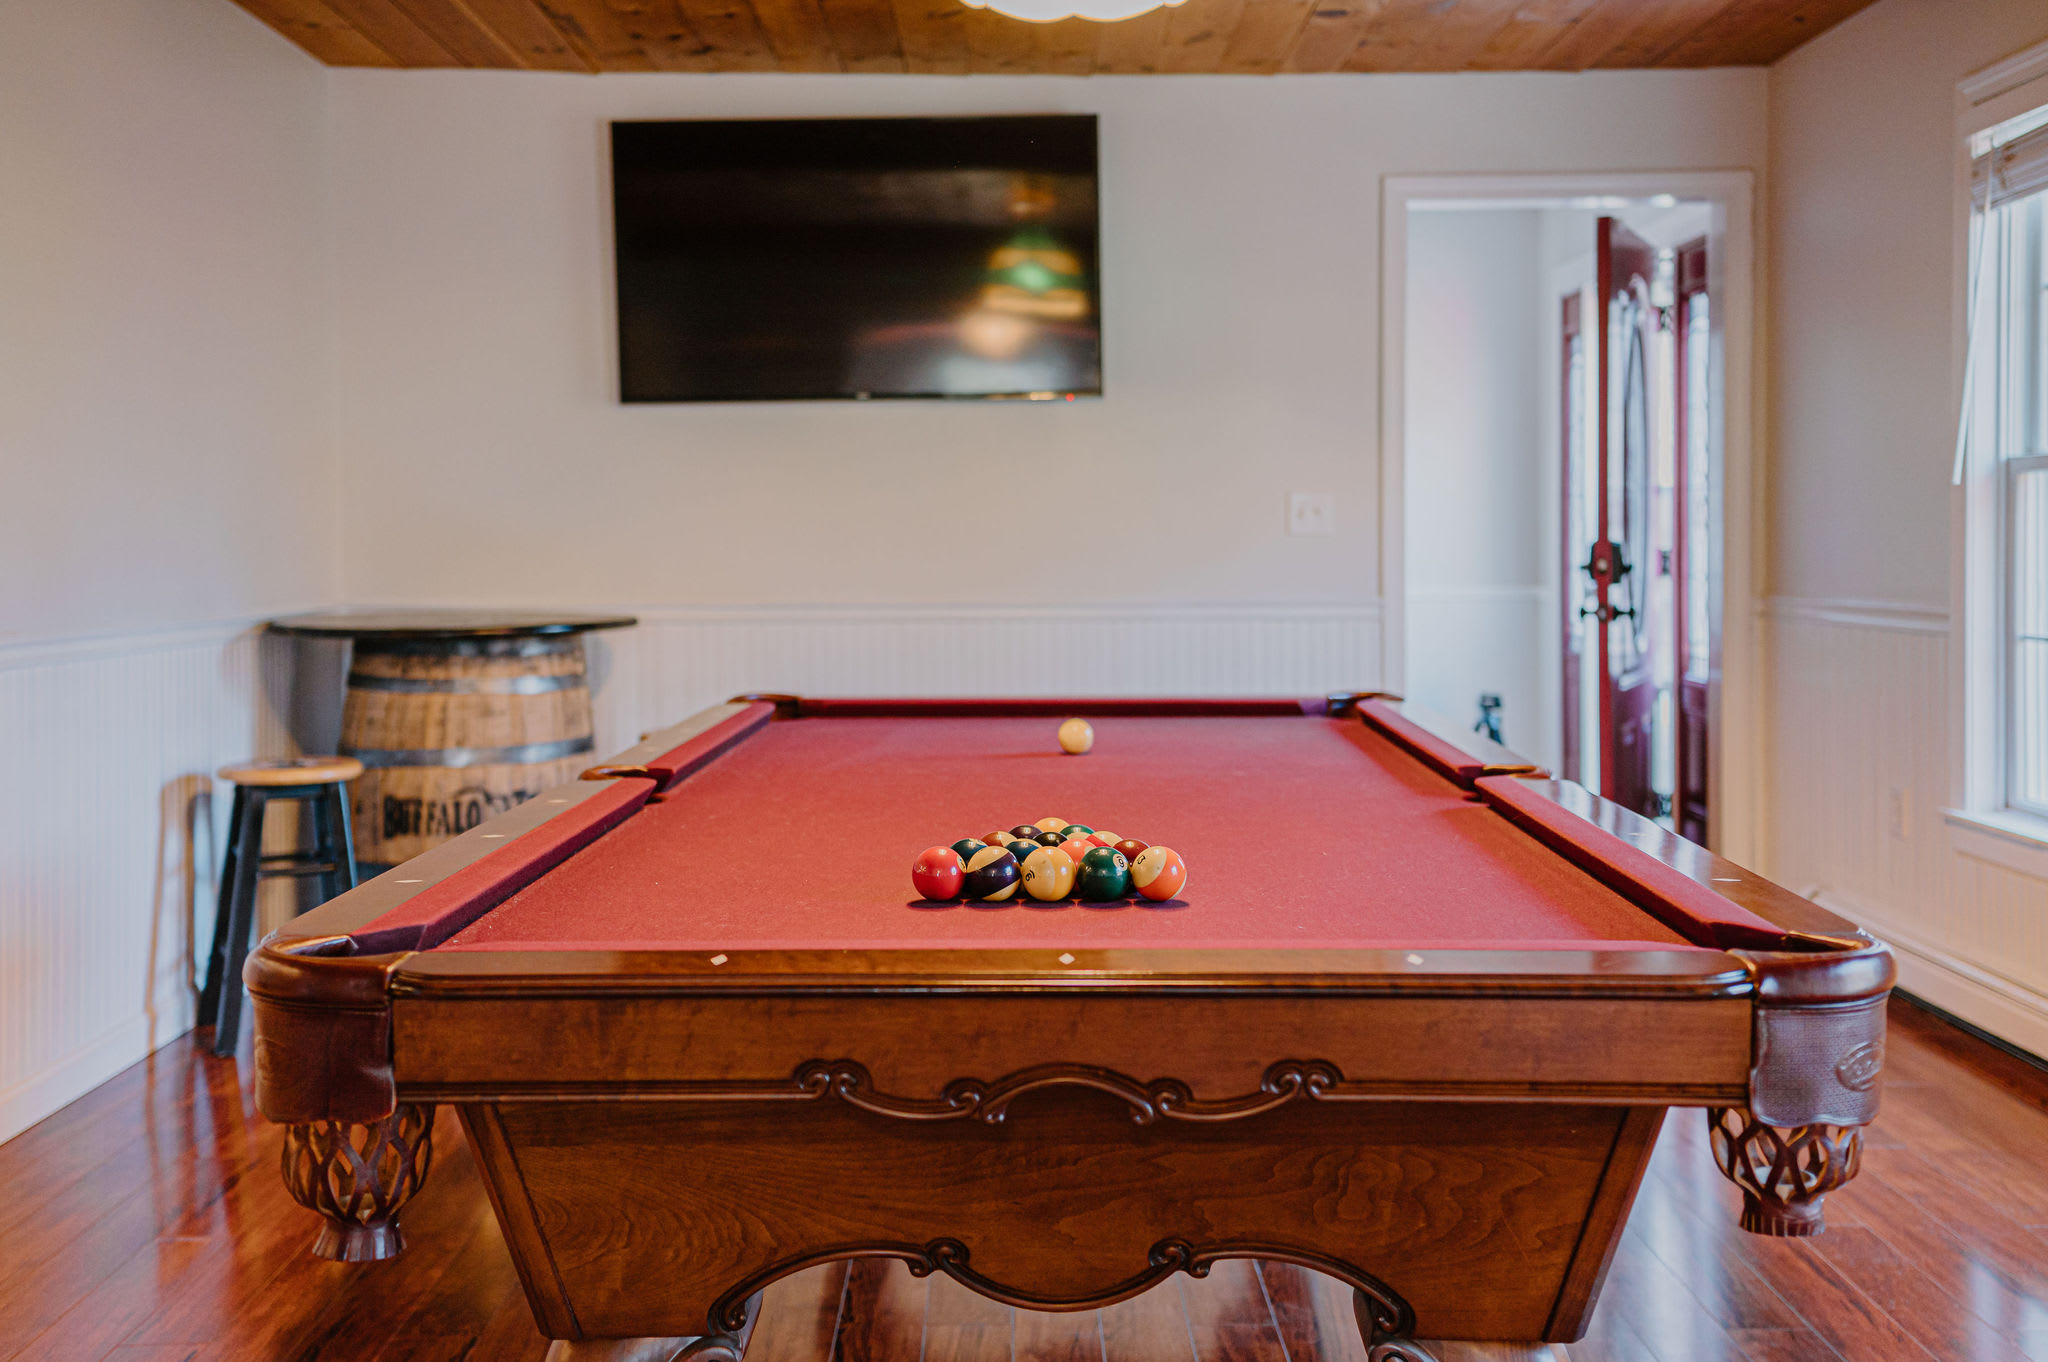 Enjoy the regulation 8 foot pool table with Smart TV, seating at the Buffalo Trace barrel table